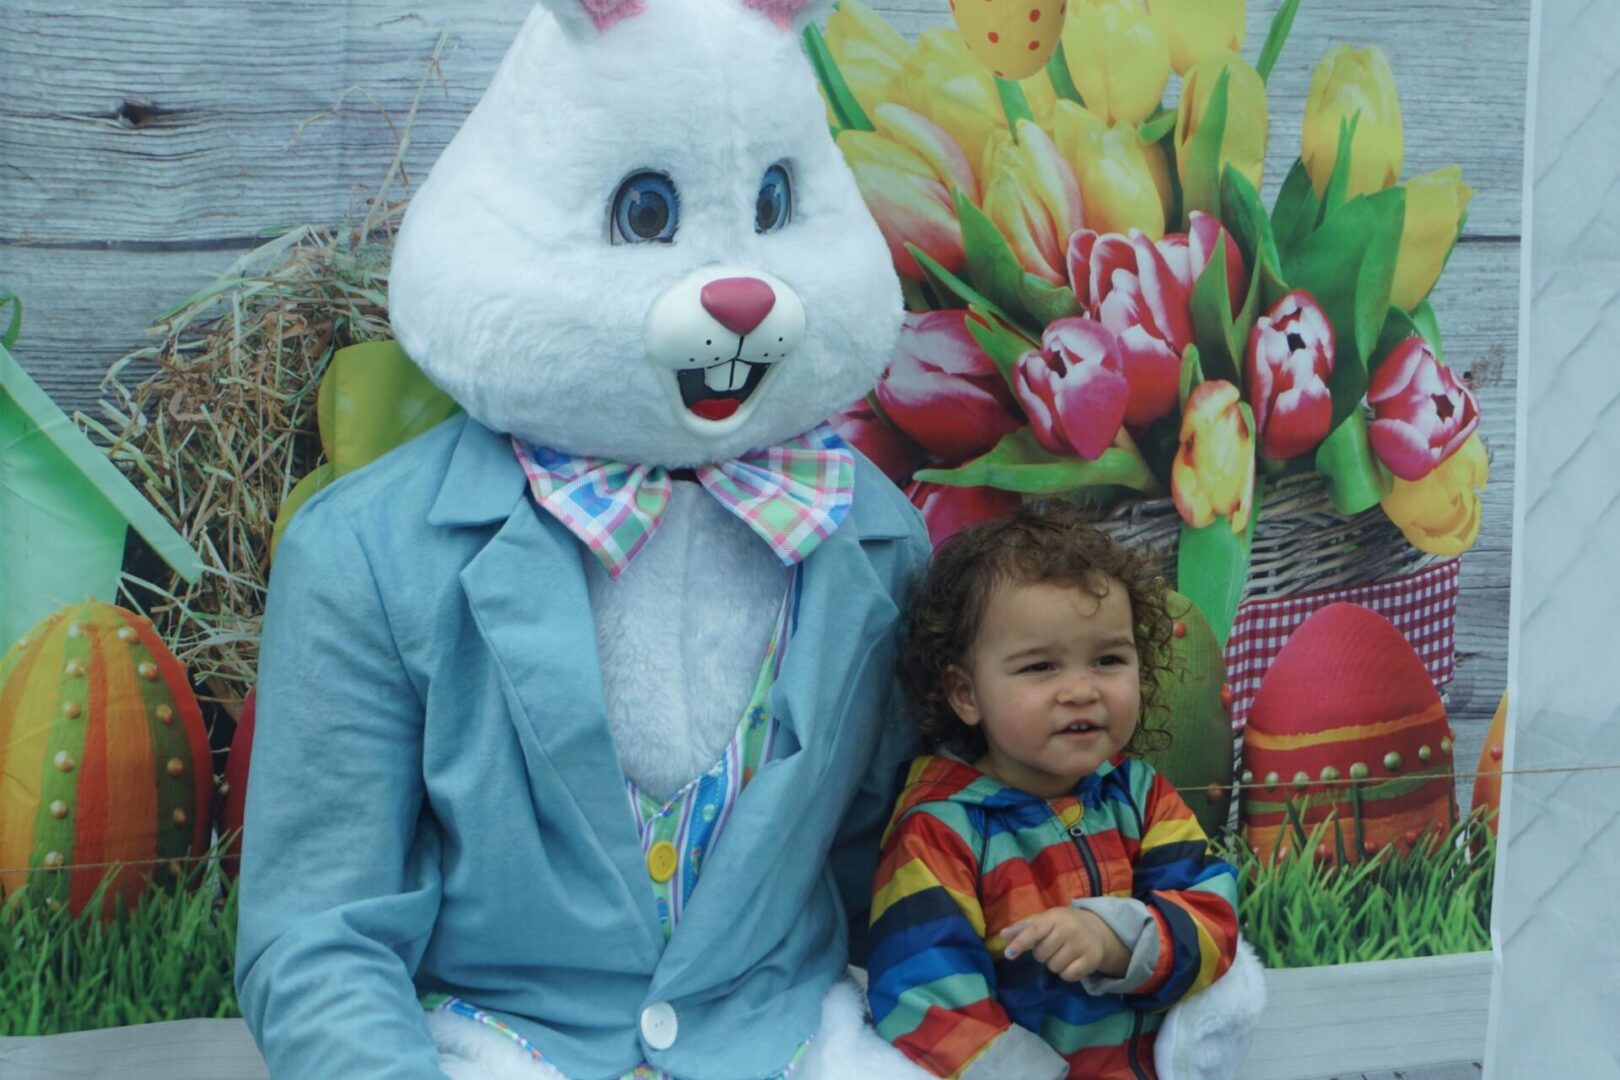 A toddler in a rainbow jacket and a bunny mascot